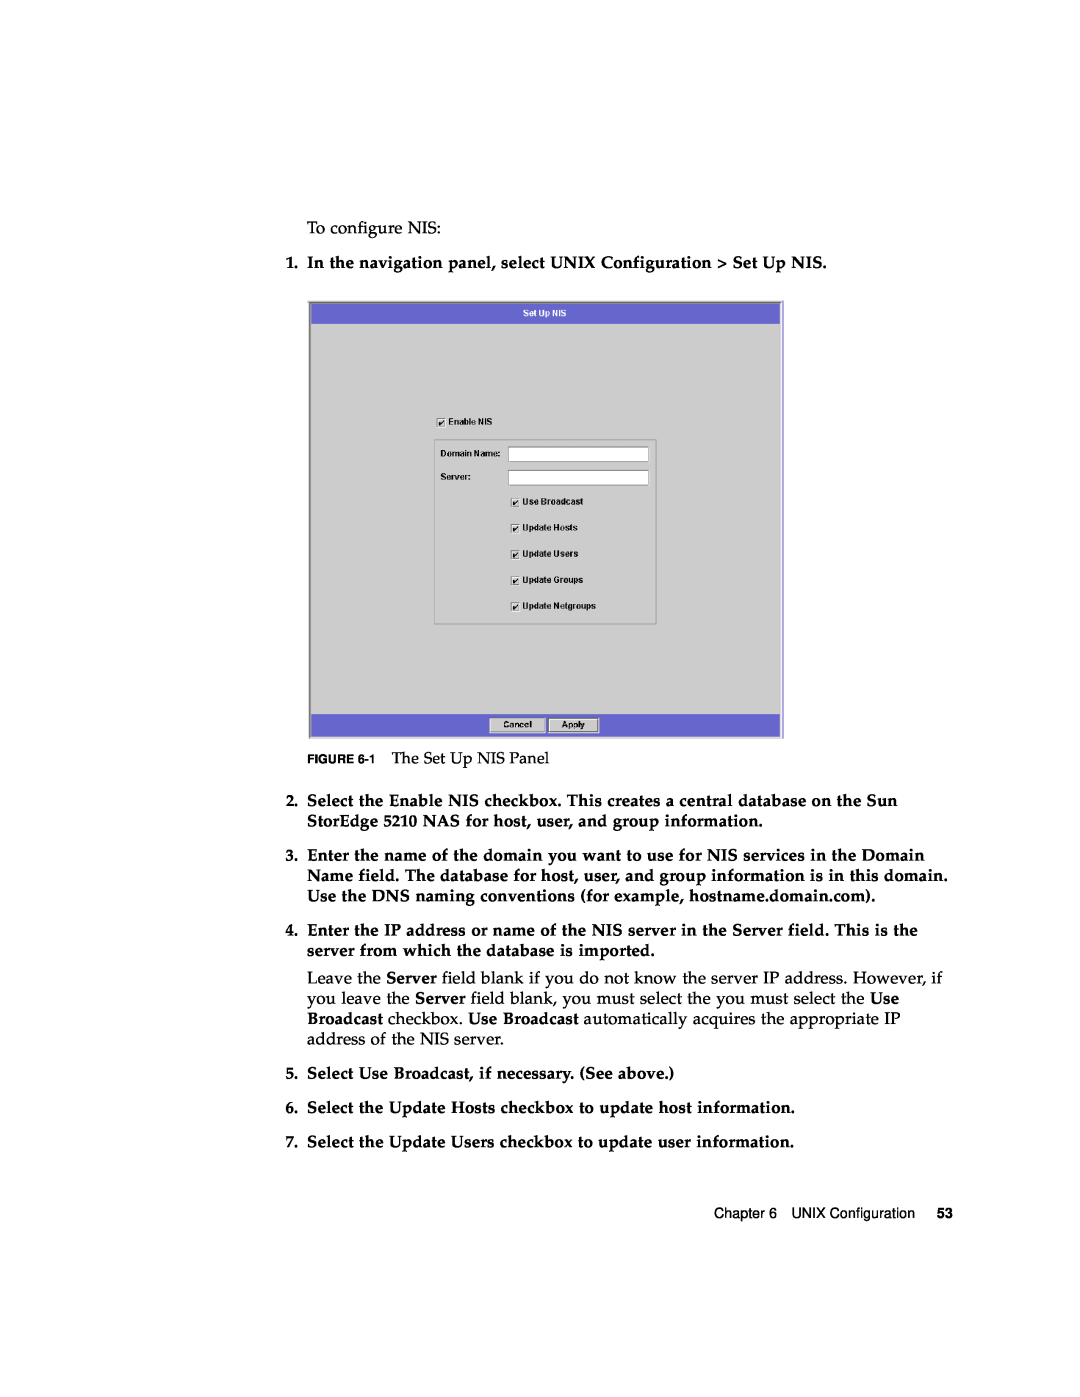 Sun Microsystems 5210 NAS manual In the navigation panel, select UNIX Configuration Set Up NIS 